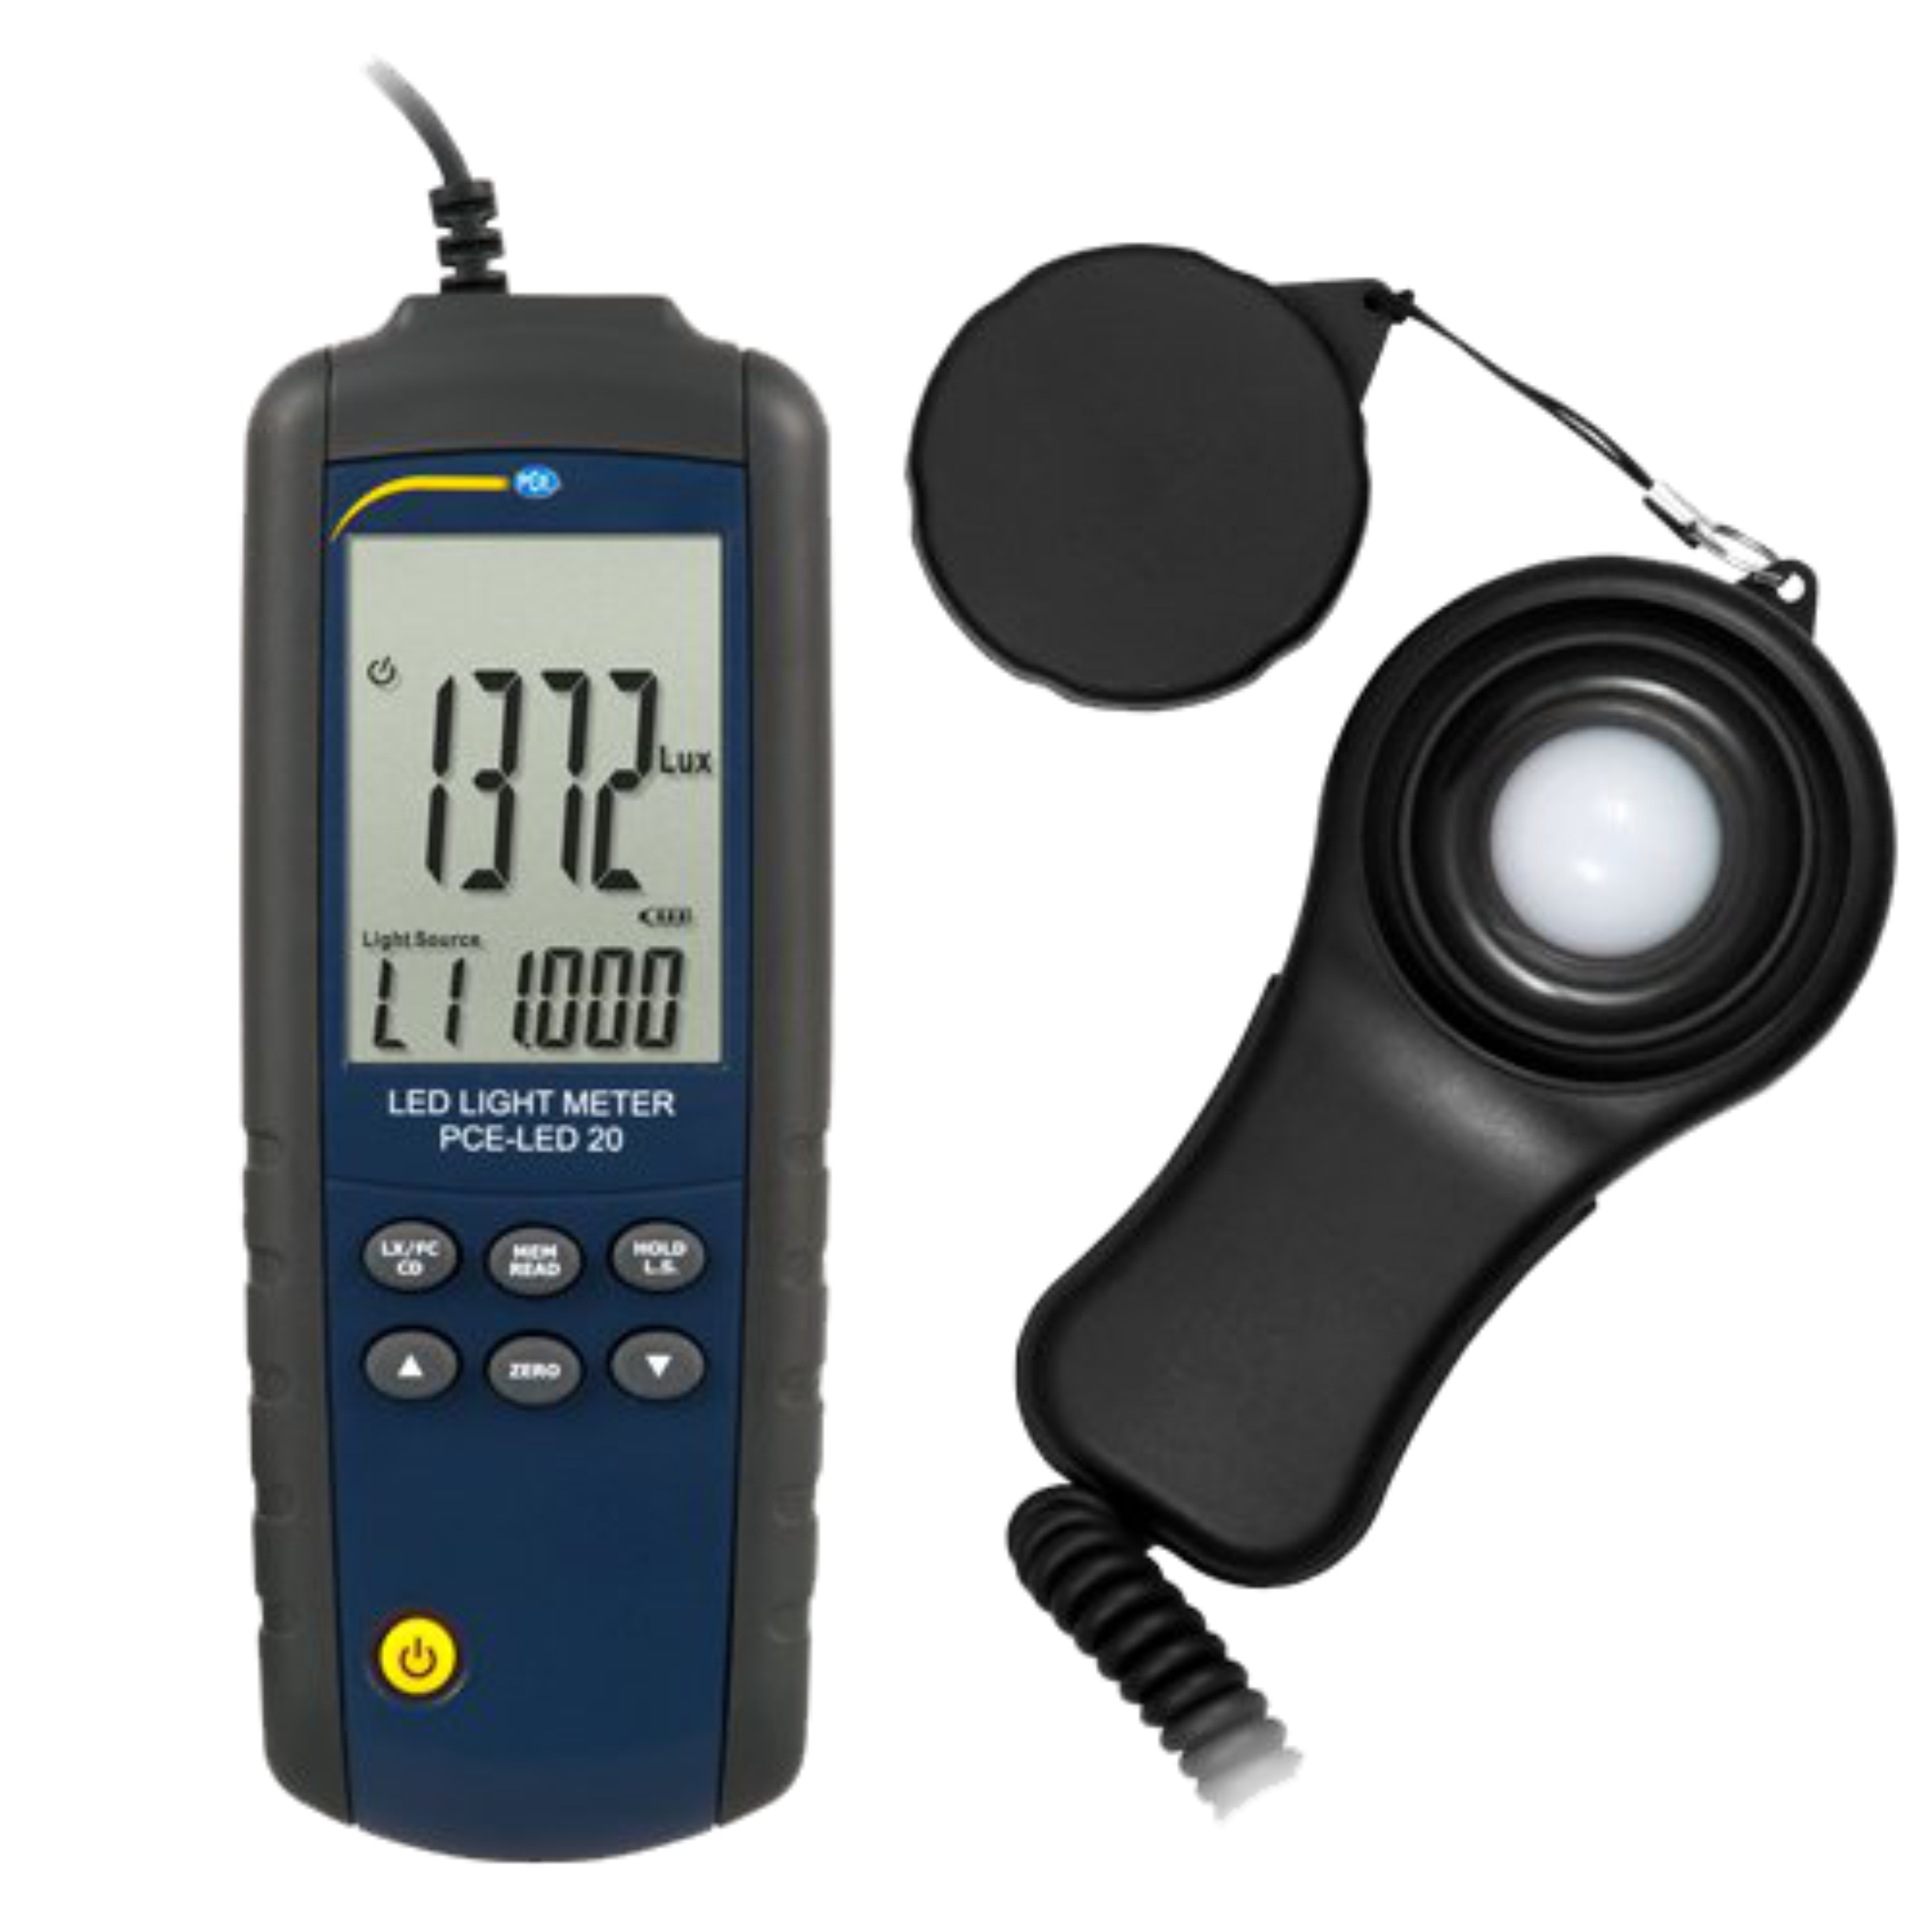 LED Lux Meter PCE-LED 20